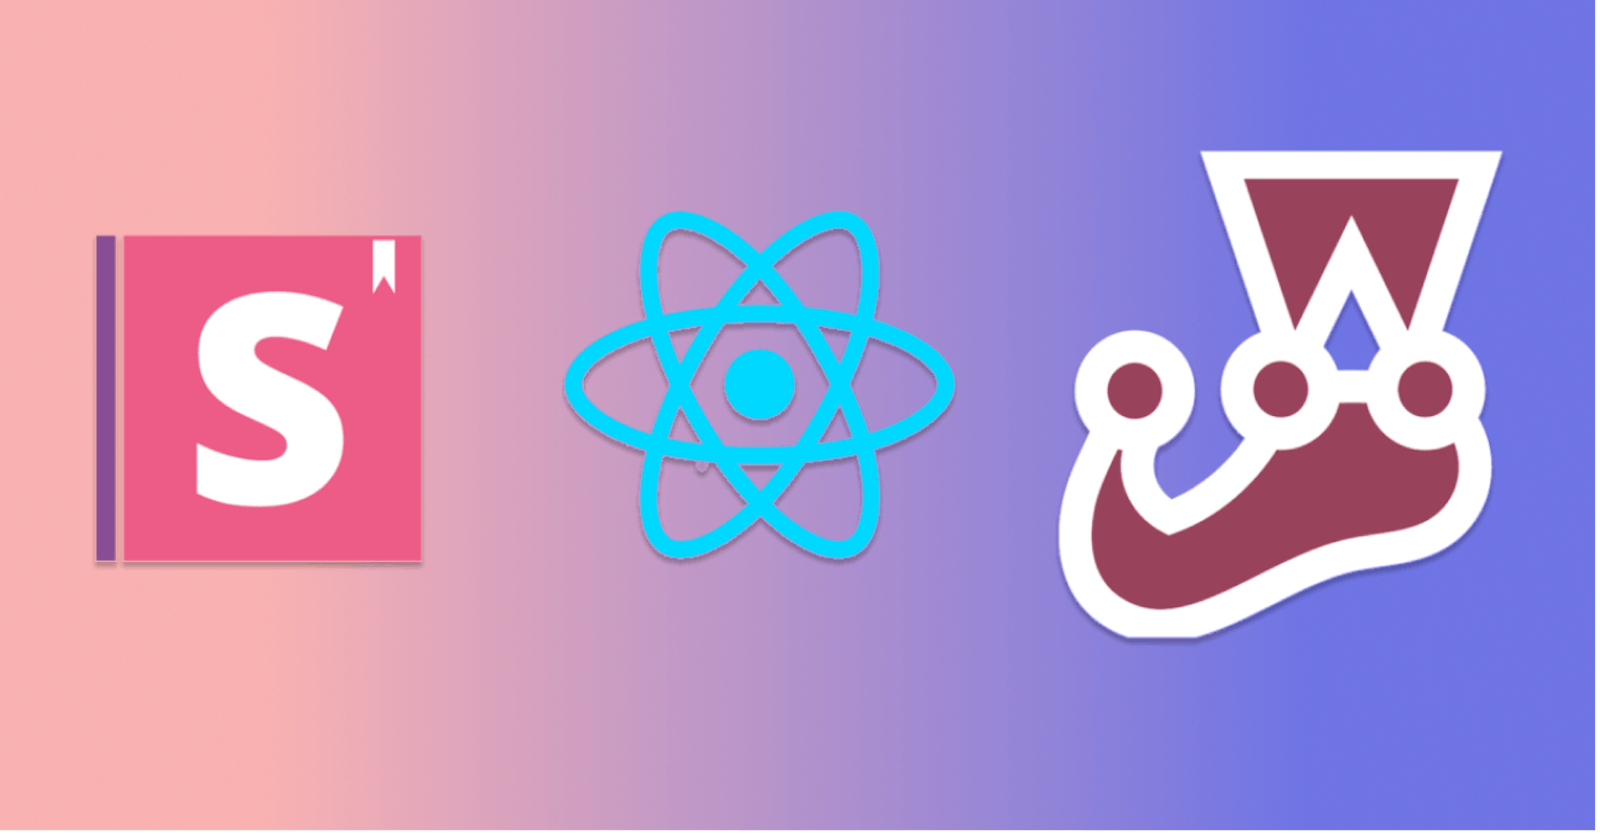 Testing React Components: The Snapshot & Component Testing in Isolation